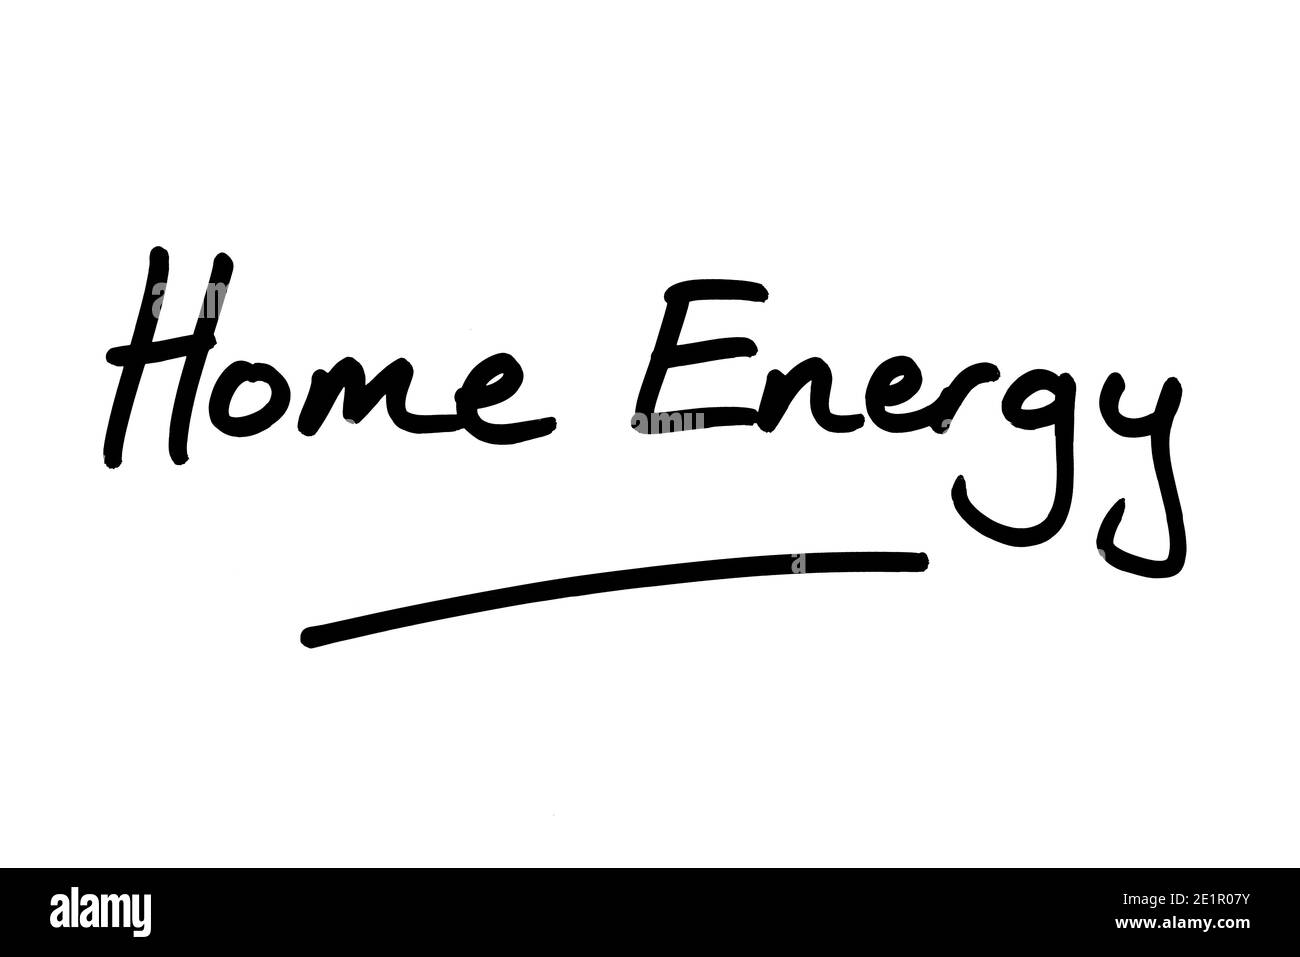 Home Energy handwritten on a white background. Stock Photo